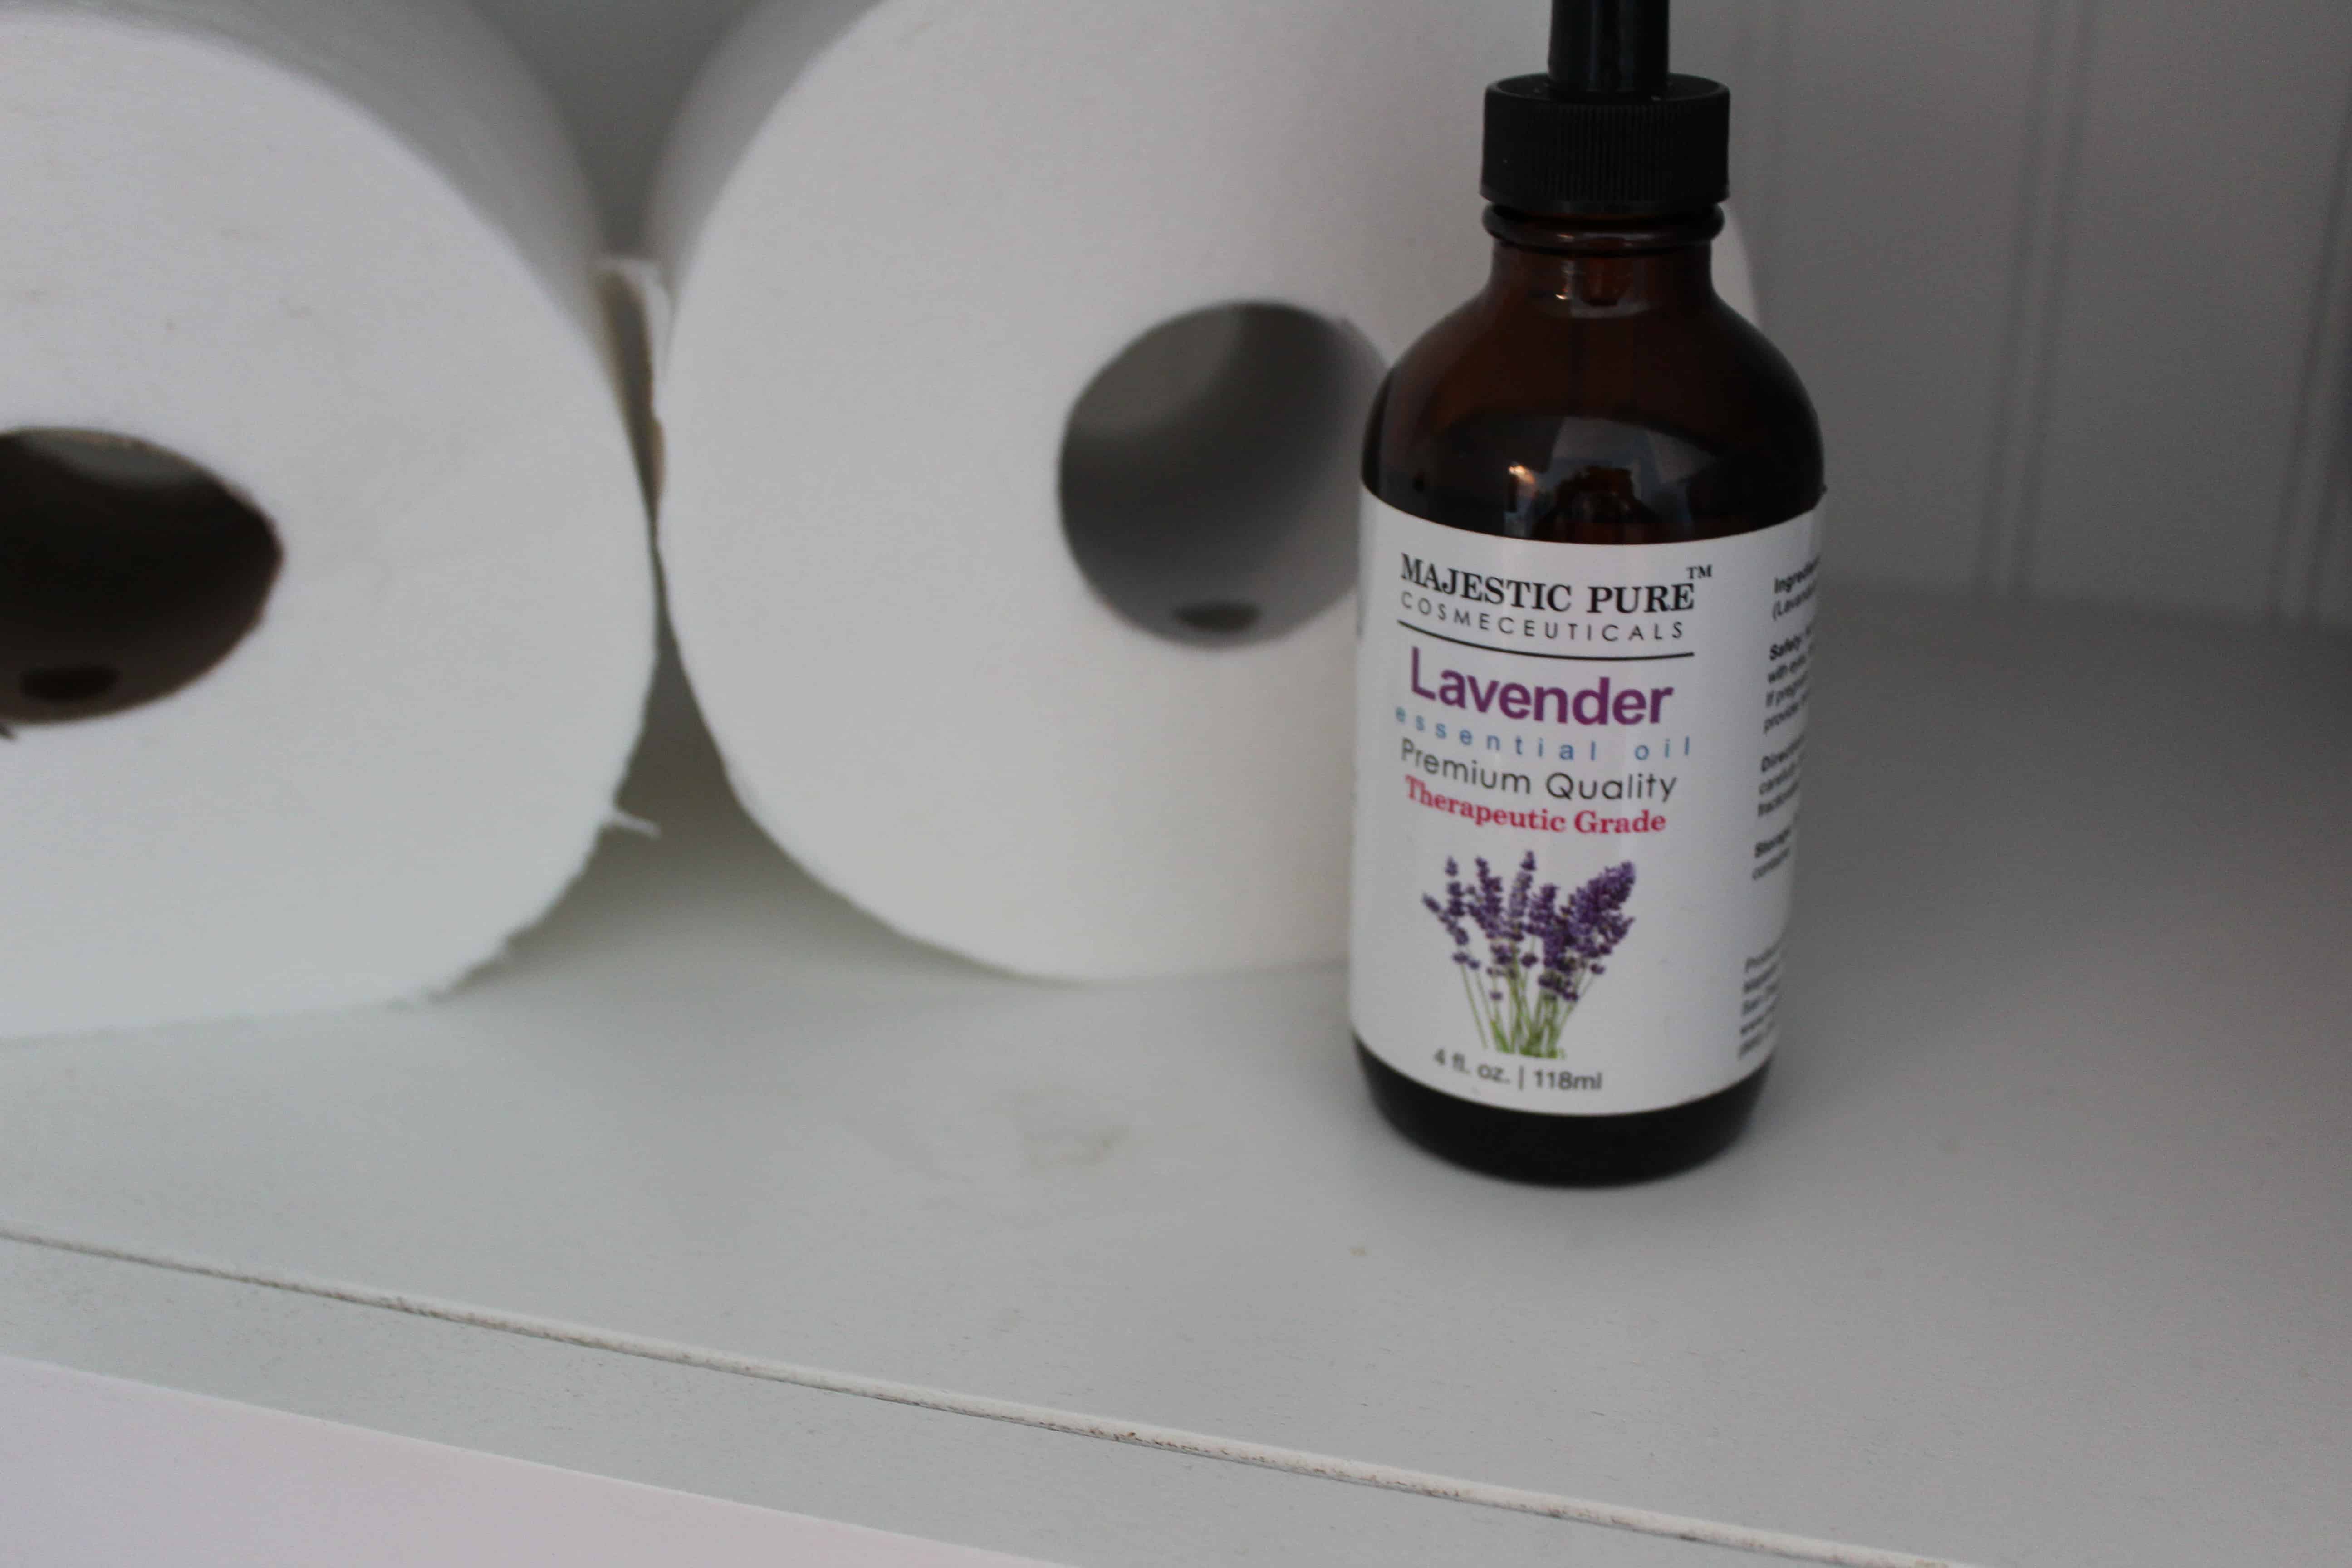 Stacked toilet paper rolls with a small bottle of lavender essential oils